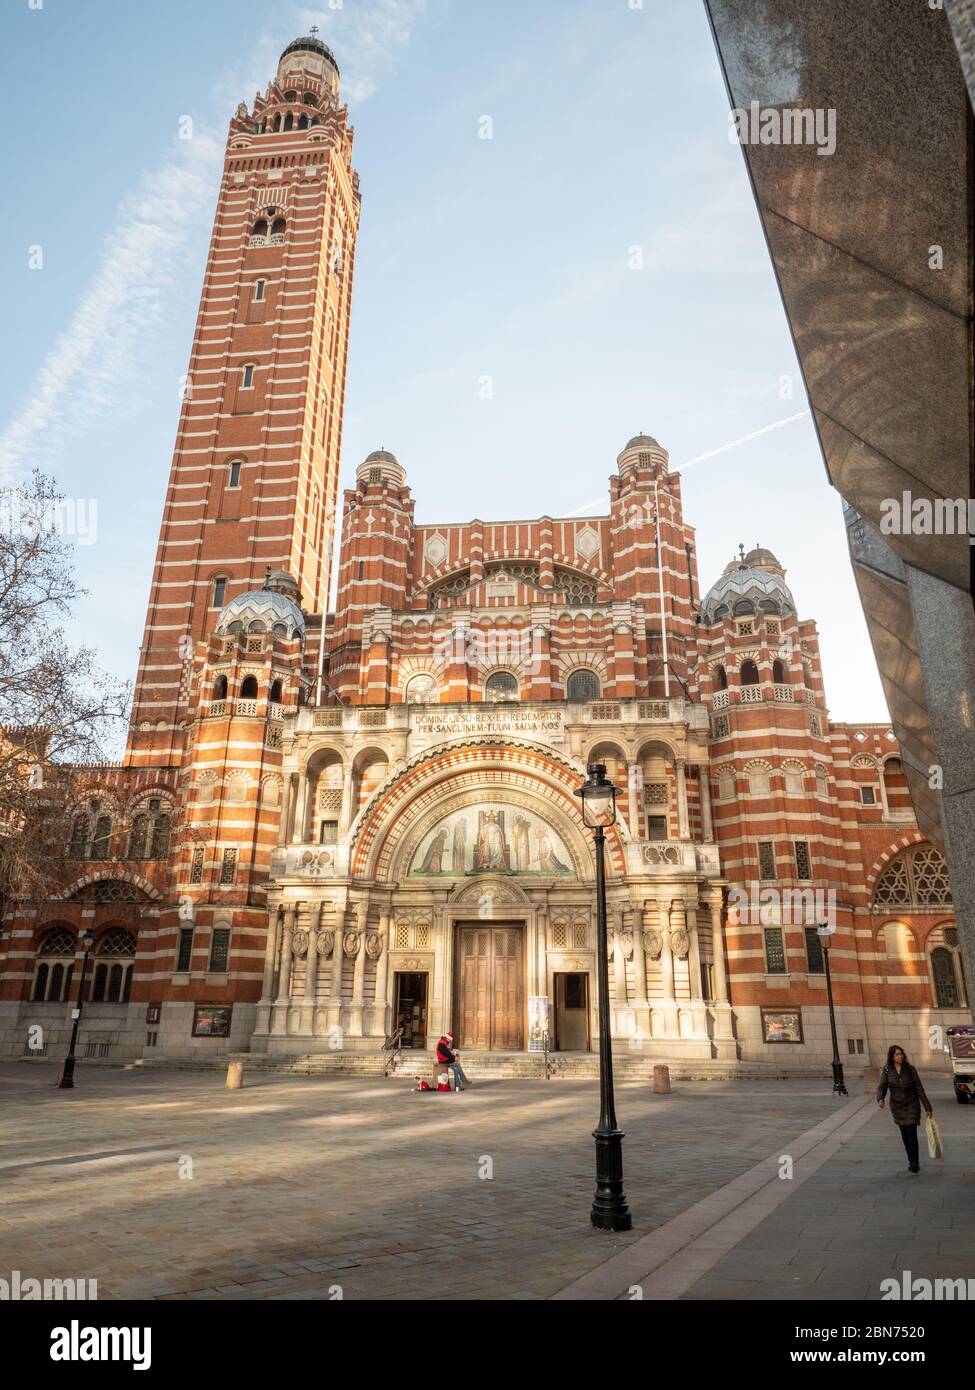 Westminster Cathedral, London. The largest Catholic church building in England and Wales and the seat to the Archbishop of Westminster. Stock Photo